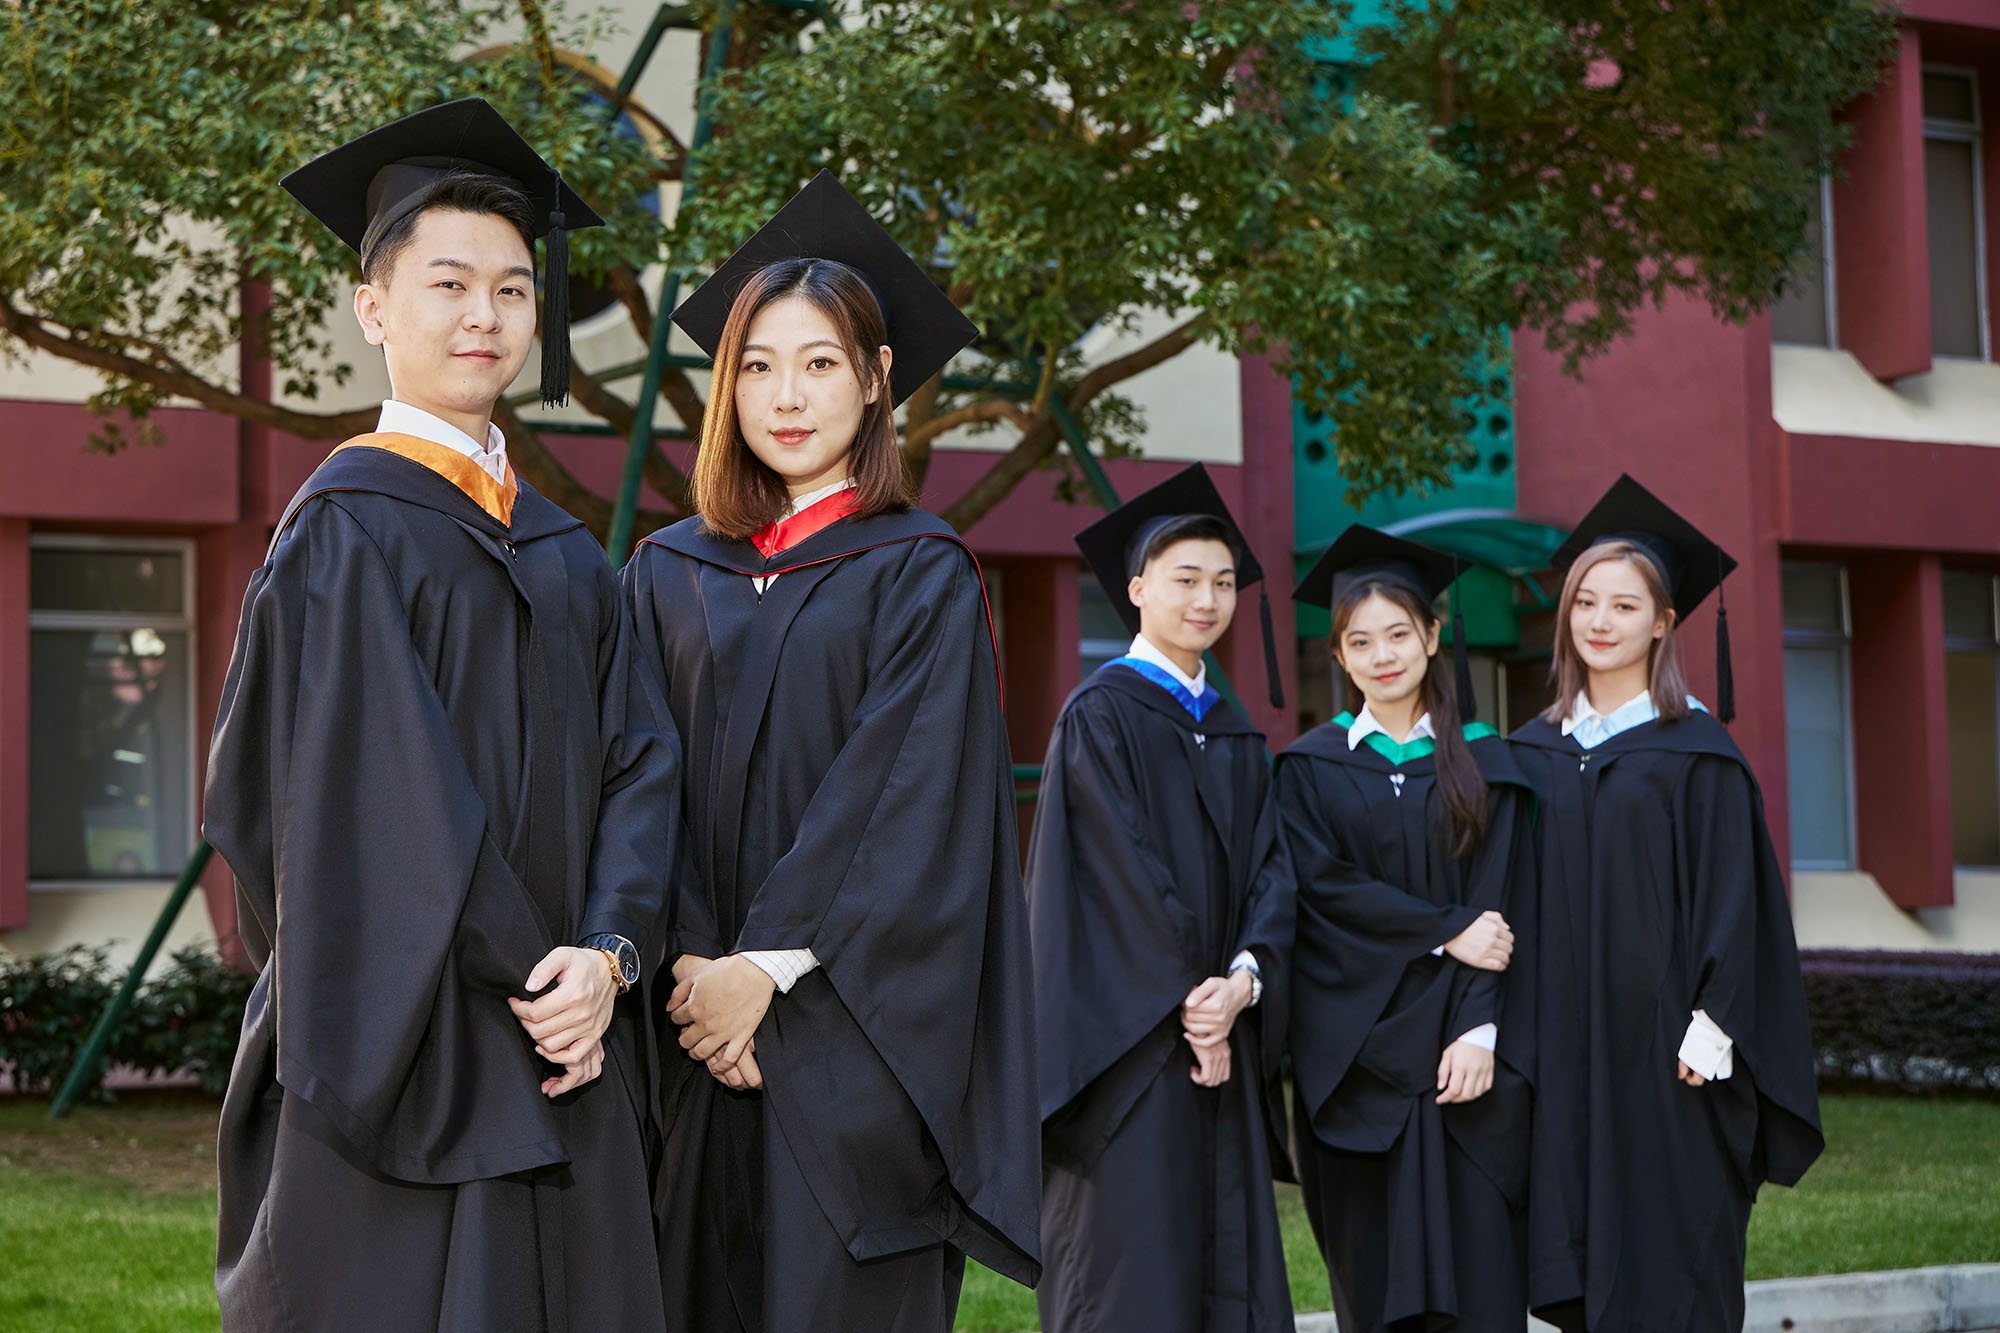 Macao Polytechnic University : Rankings, Fees & Courses Details | Top ...